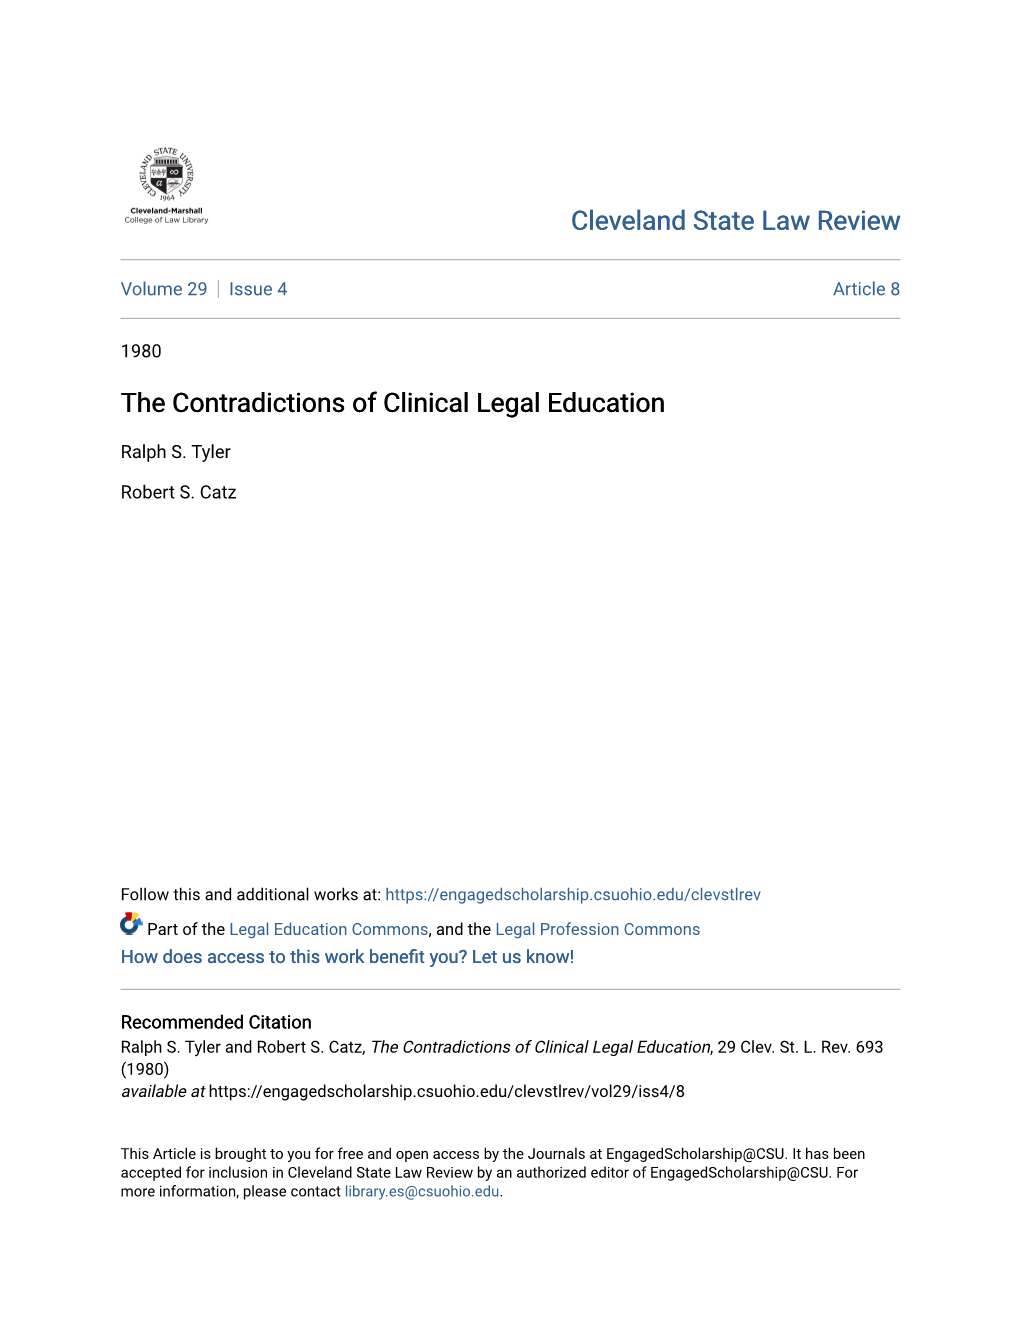 The Contradictions of Clinical Legal Education